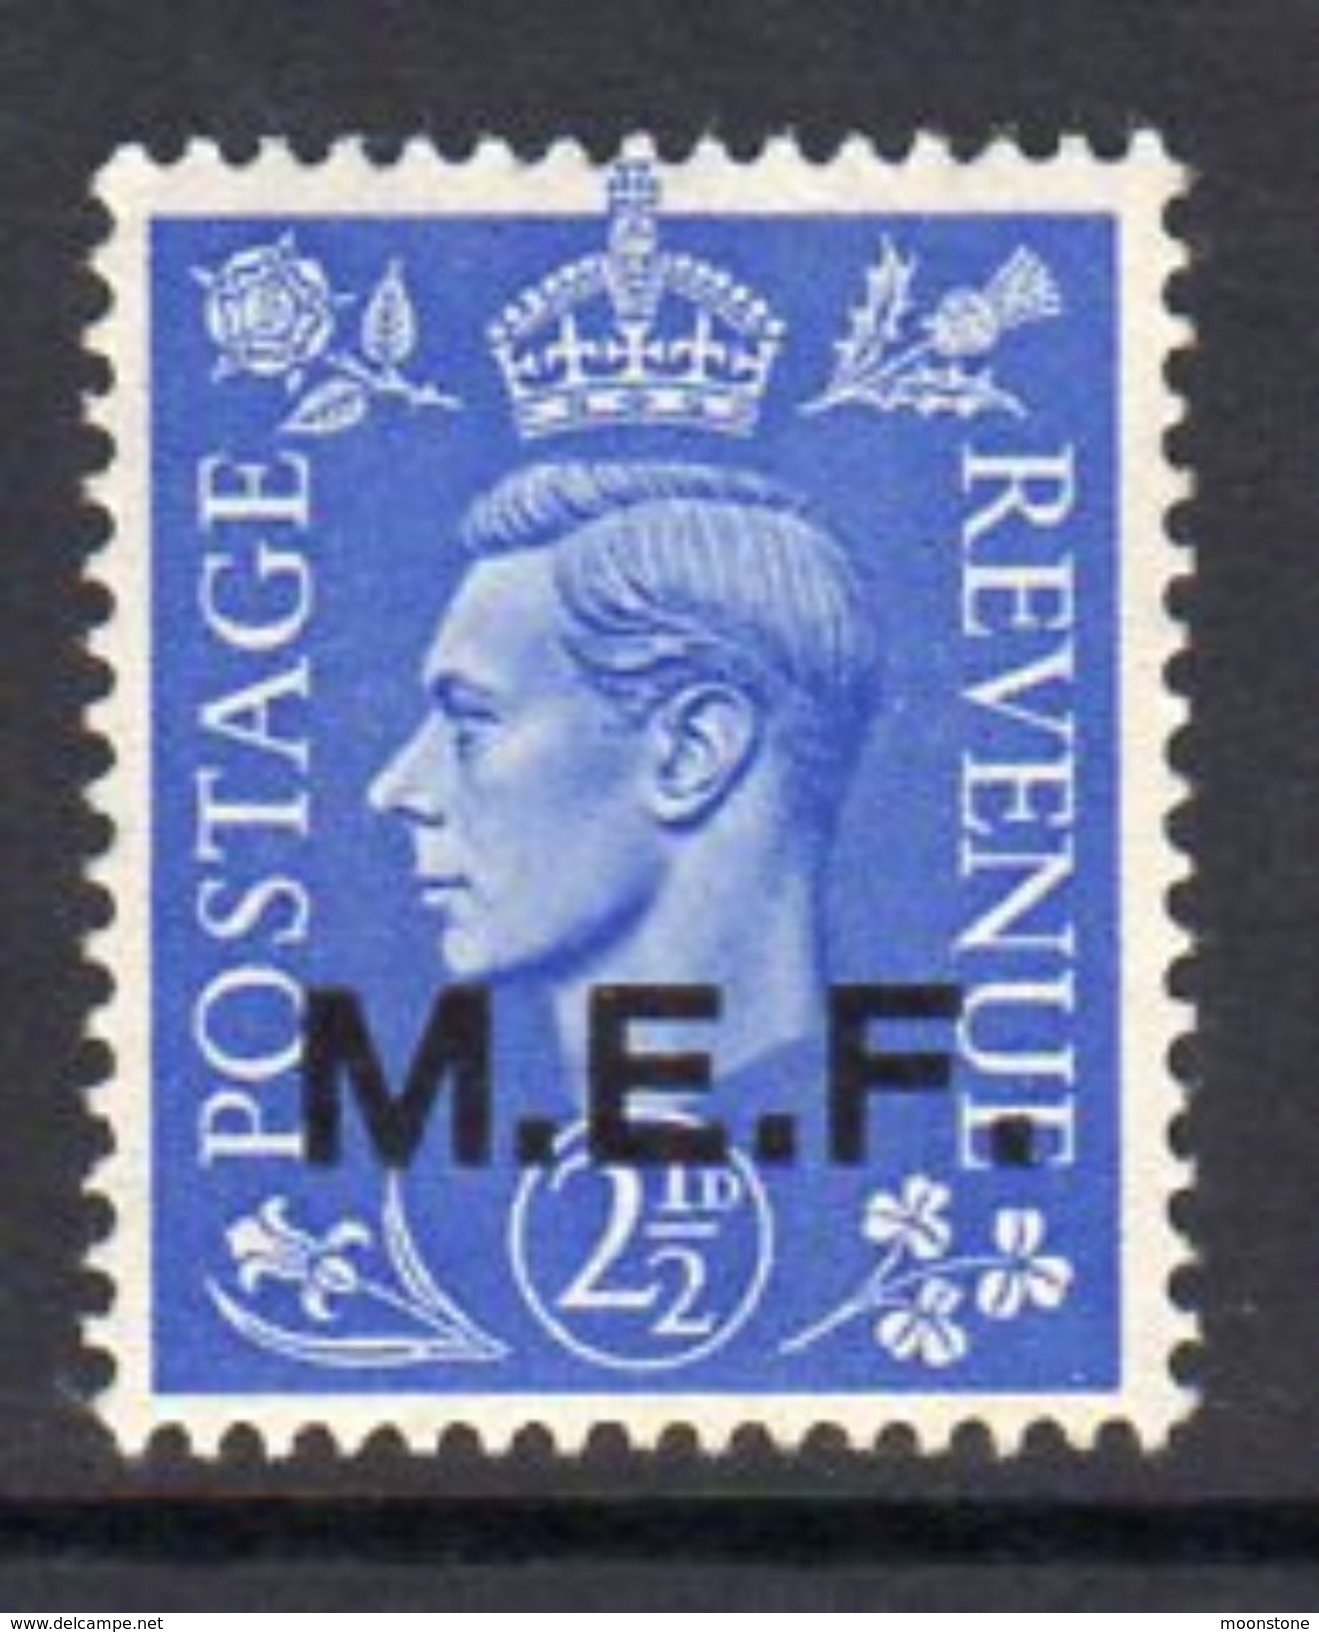 BOIC, Middle East Forces 1943-7 2½d 13½mm Overprint On GB, Hinged Mint, SG M13 (A) - Occ. Britanique MEF